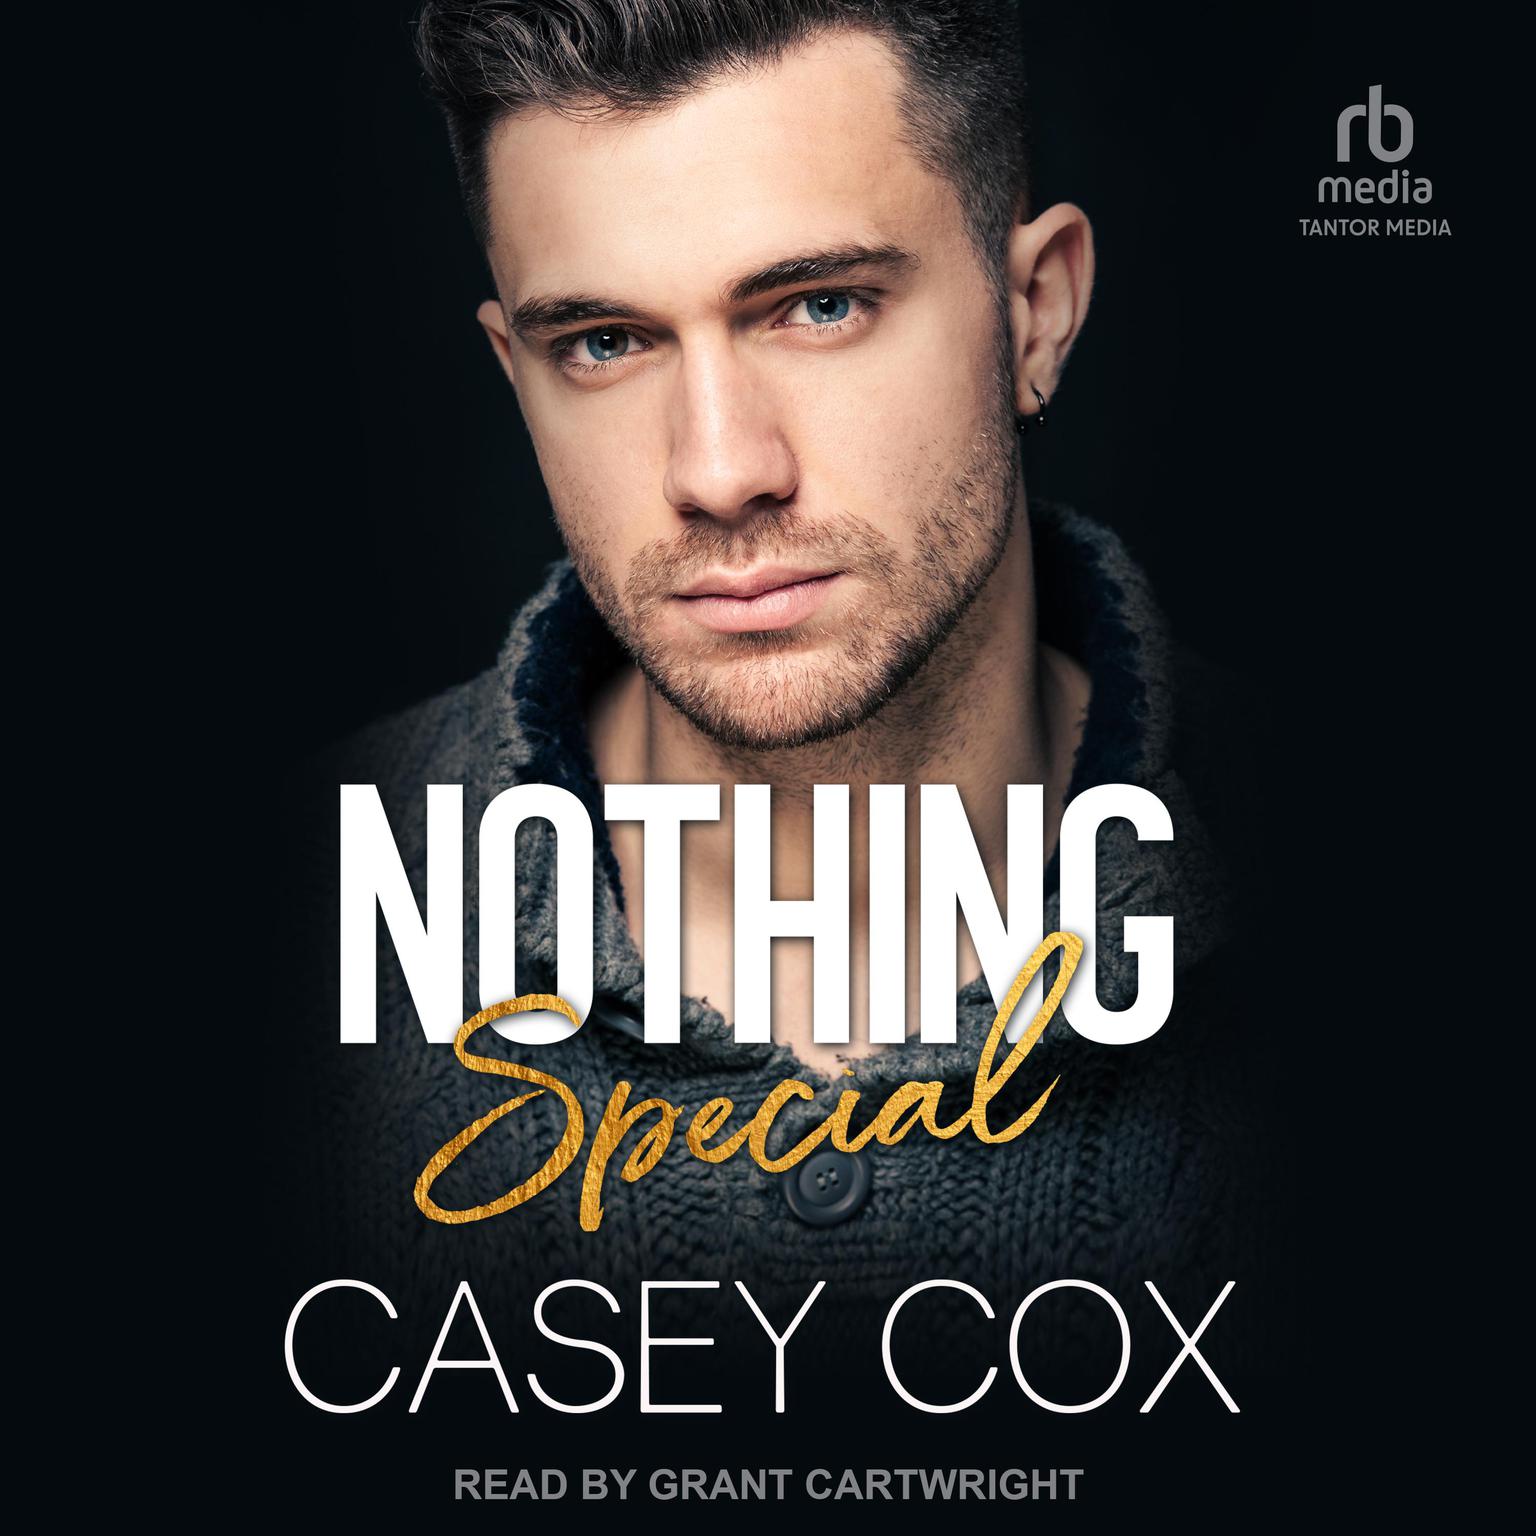 Nothing Special Audiobook, by Casey Cox